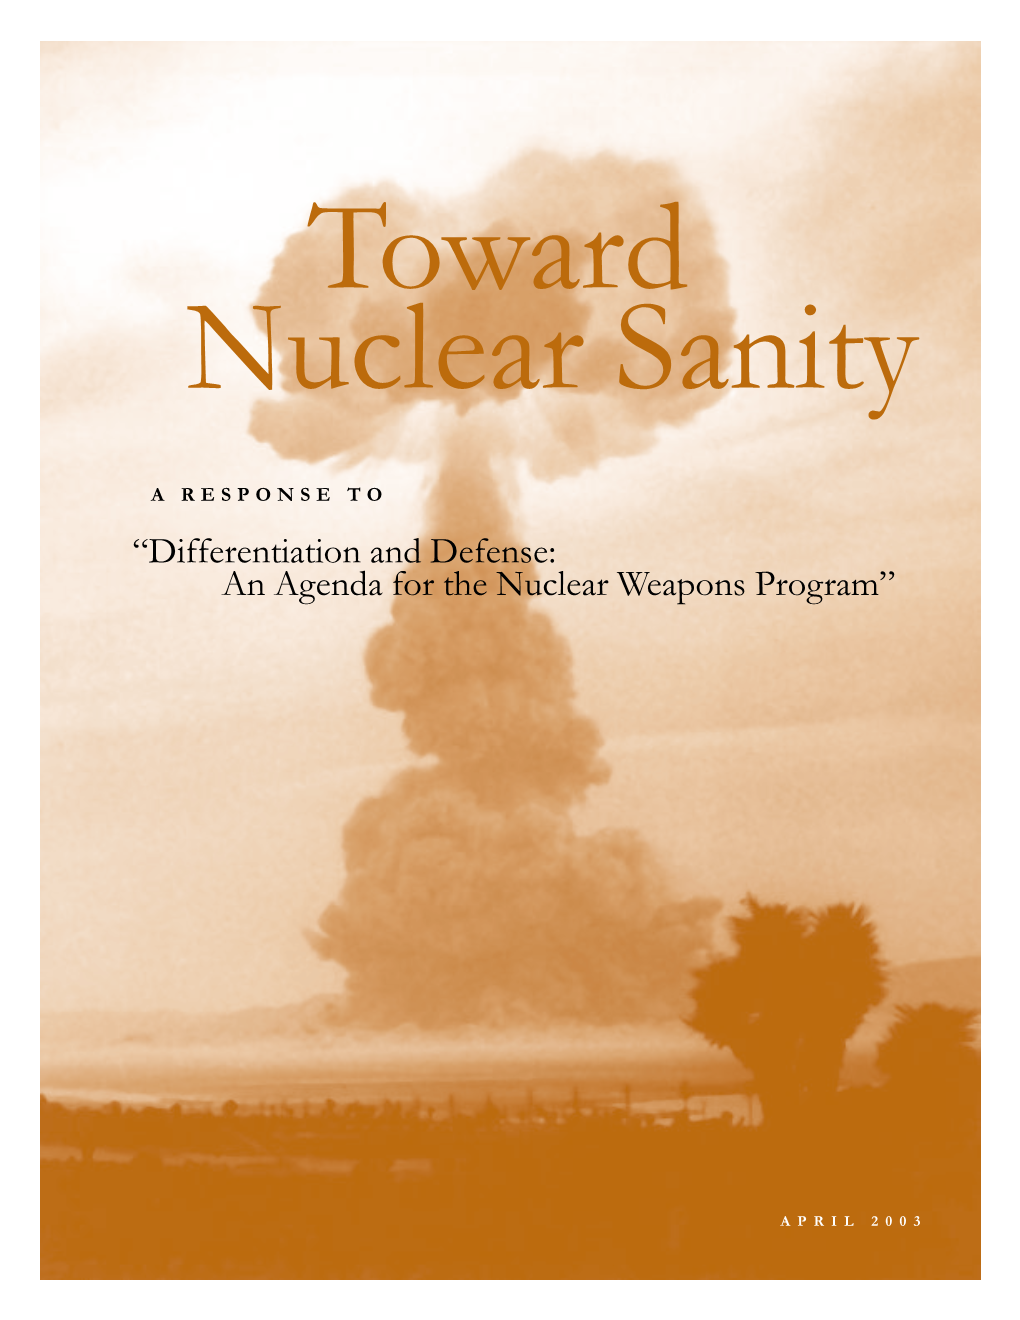 Differentiation and Defense: an Agenda for the Nuclear Weapons Program”